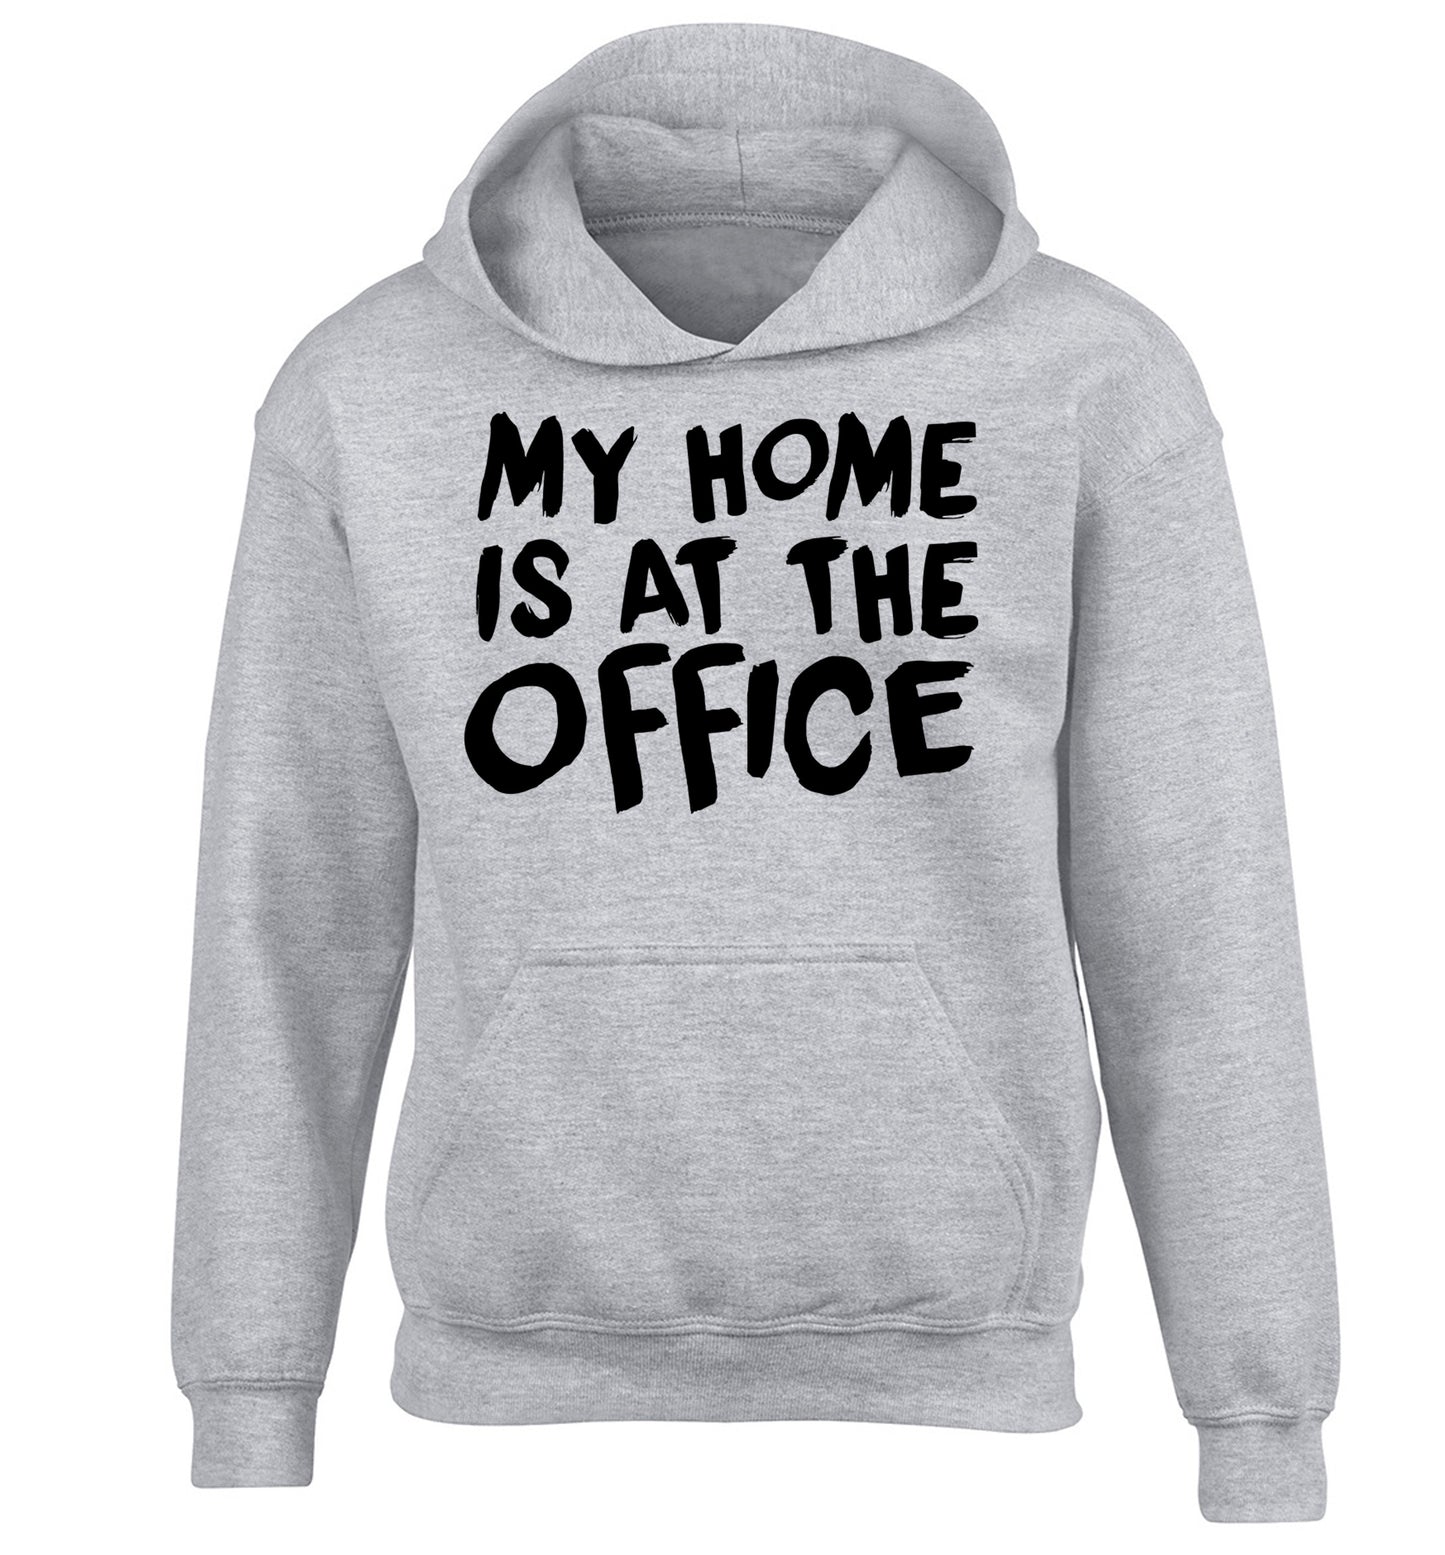 My home is at the office children's grey hoodie 12-14 Years